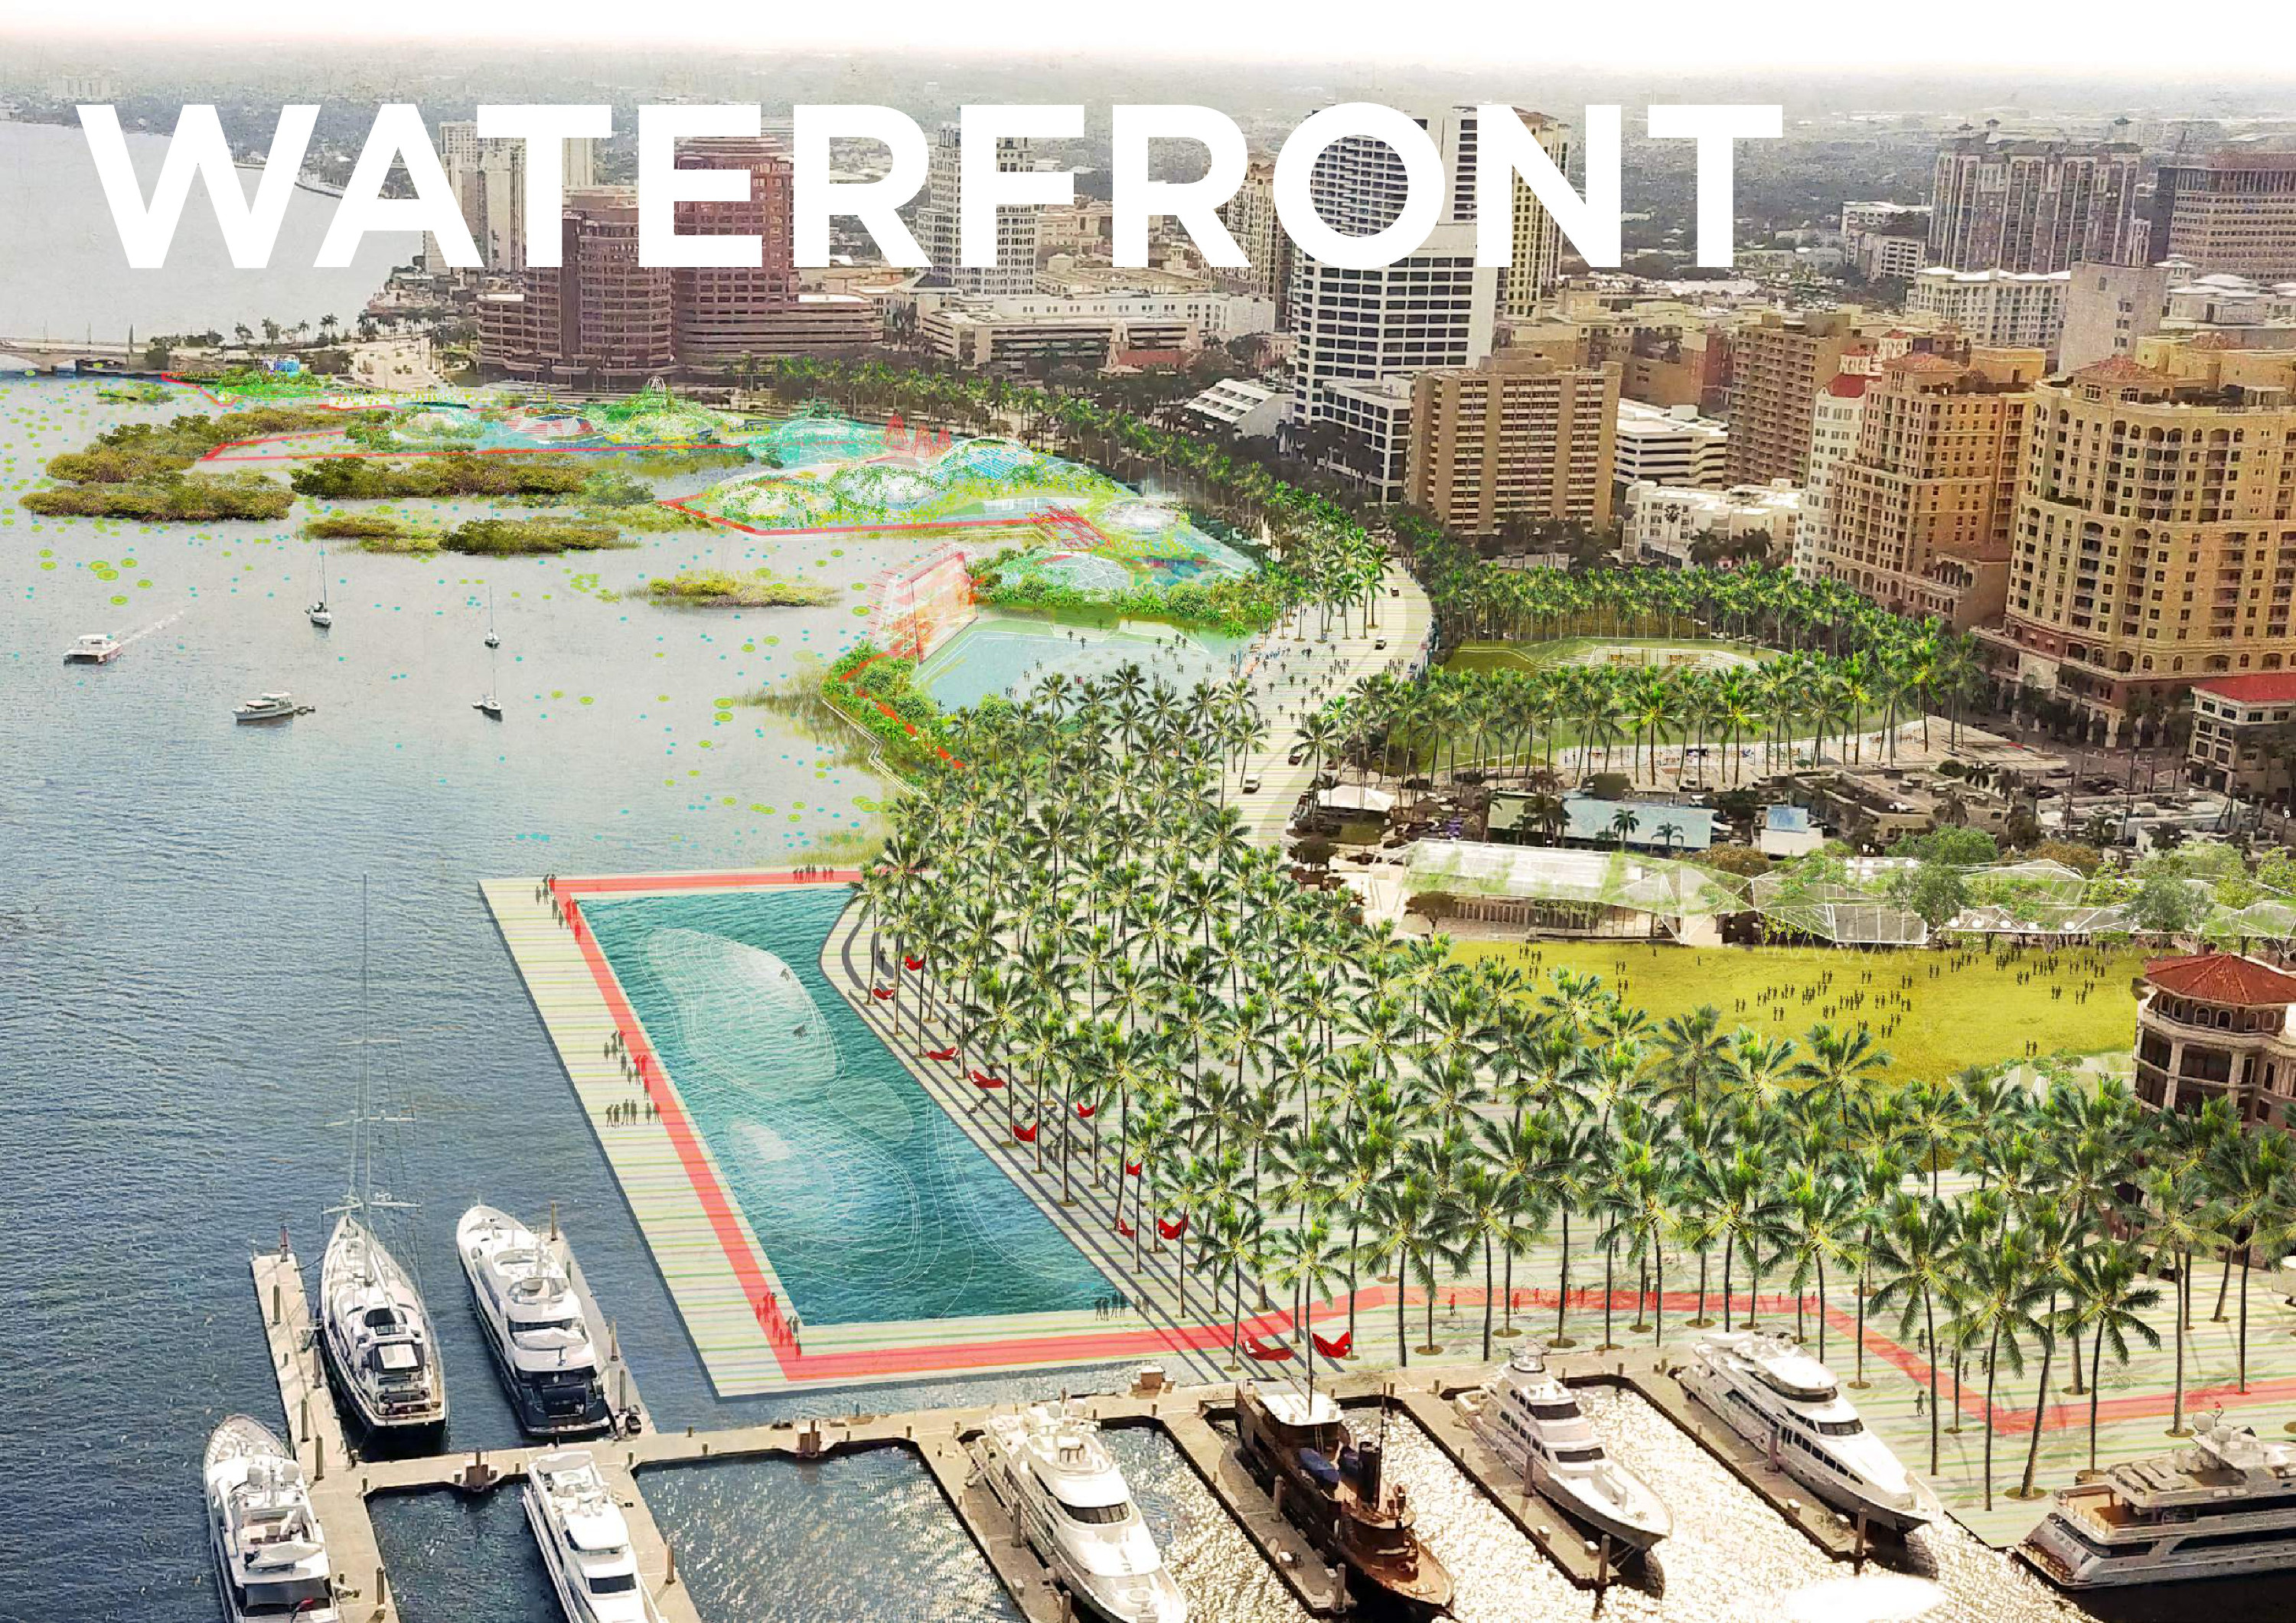 Shore to Core – My opinion on the proposals and the future of the Waterfront